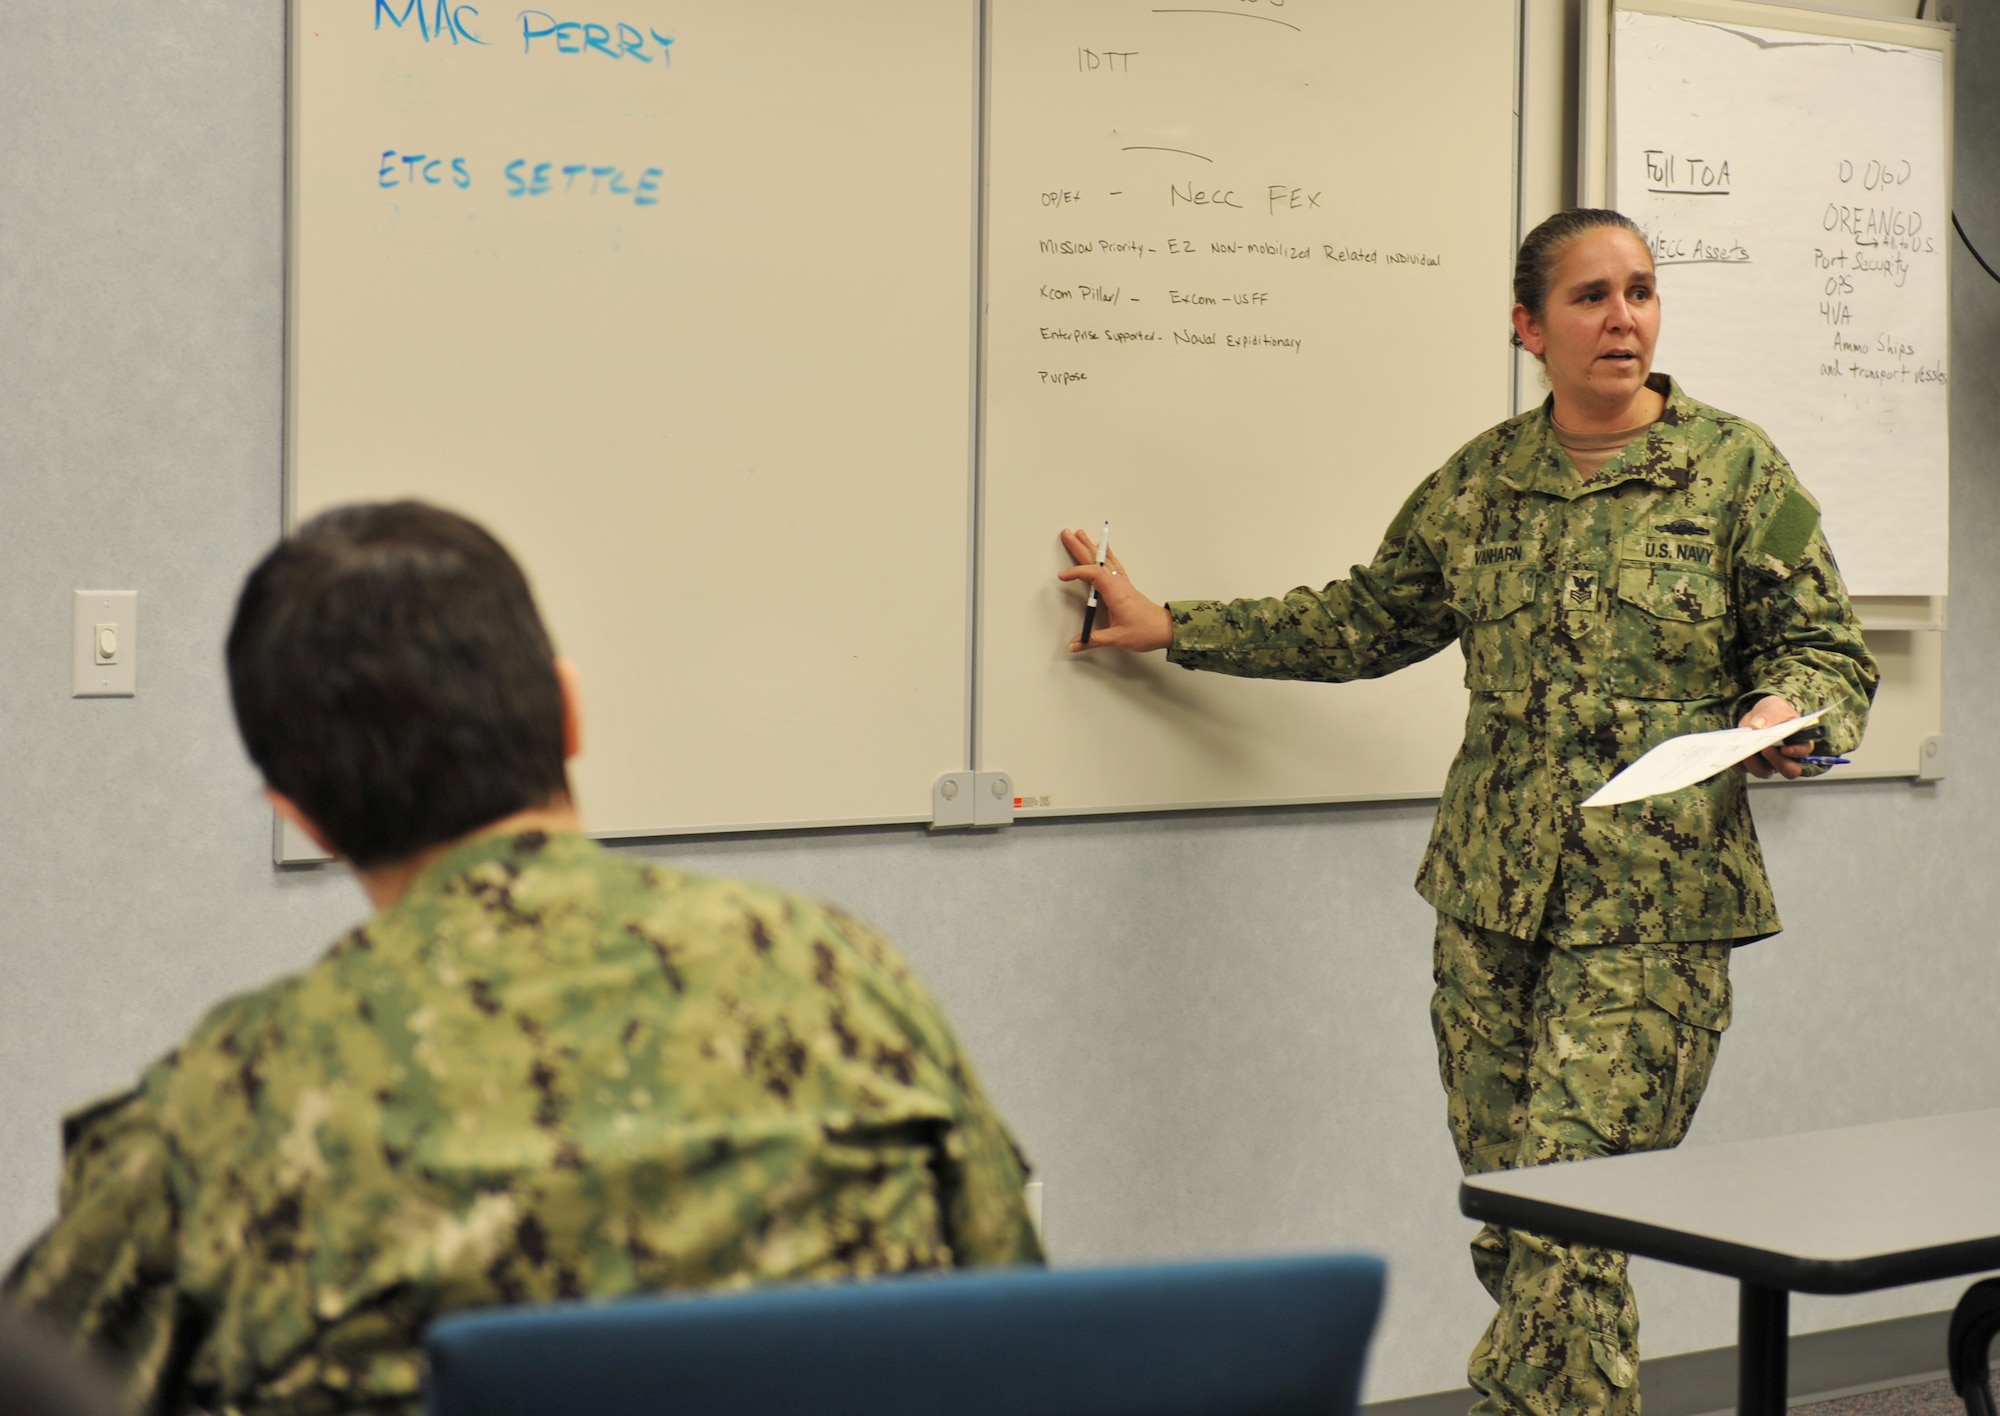 WHITEMAN AIR FORCE BASE, Mo. -- Petty Officer 1st Class Lisa Vanharn, Coastal Riverine Squadron 11, Detachment Alpha 2 information technician, provides classroom training to Naval reservists during their drill weekend, Feb. 9, 2013. Many of the security team members are gunner’s mates, masters-at-arms, logistics support personnel, information technicians or operations specialists. (U.S. Air Force photo/Heidi Hunt) (Released)